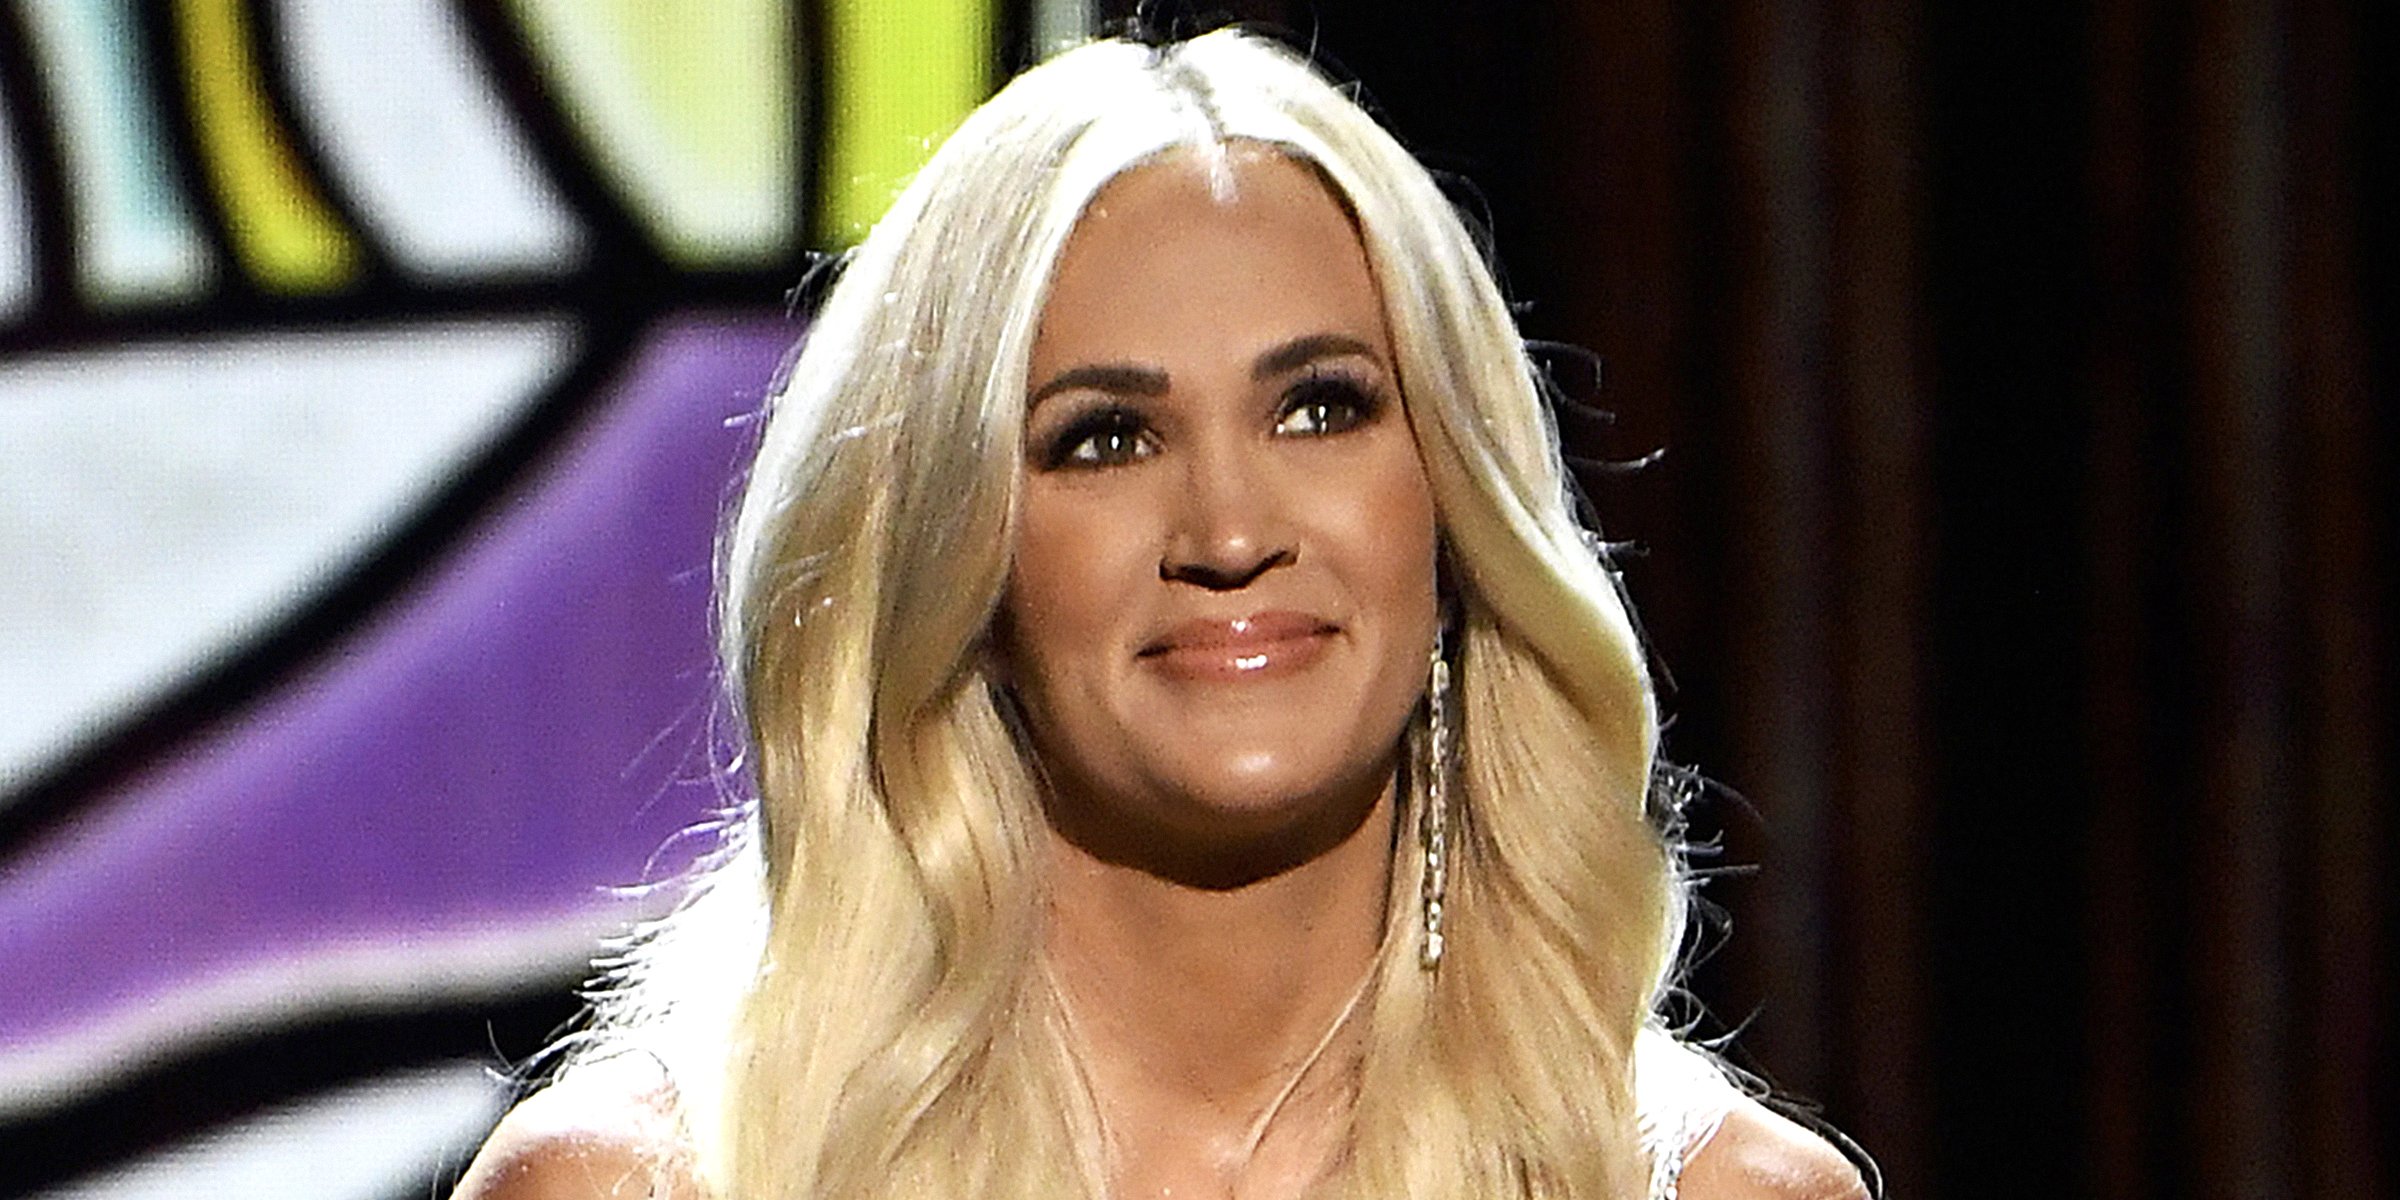 Carrie Underwood, 2021 | Source: Getty Images